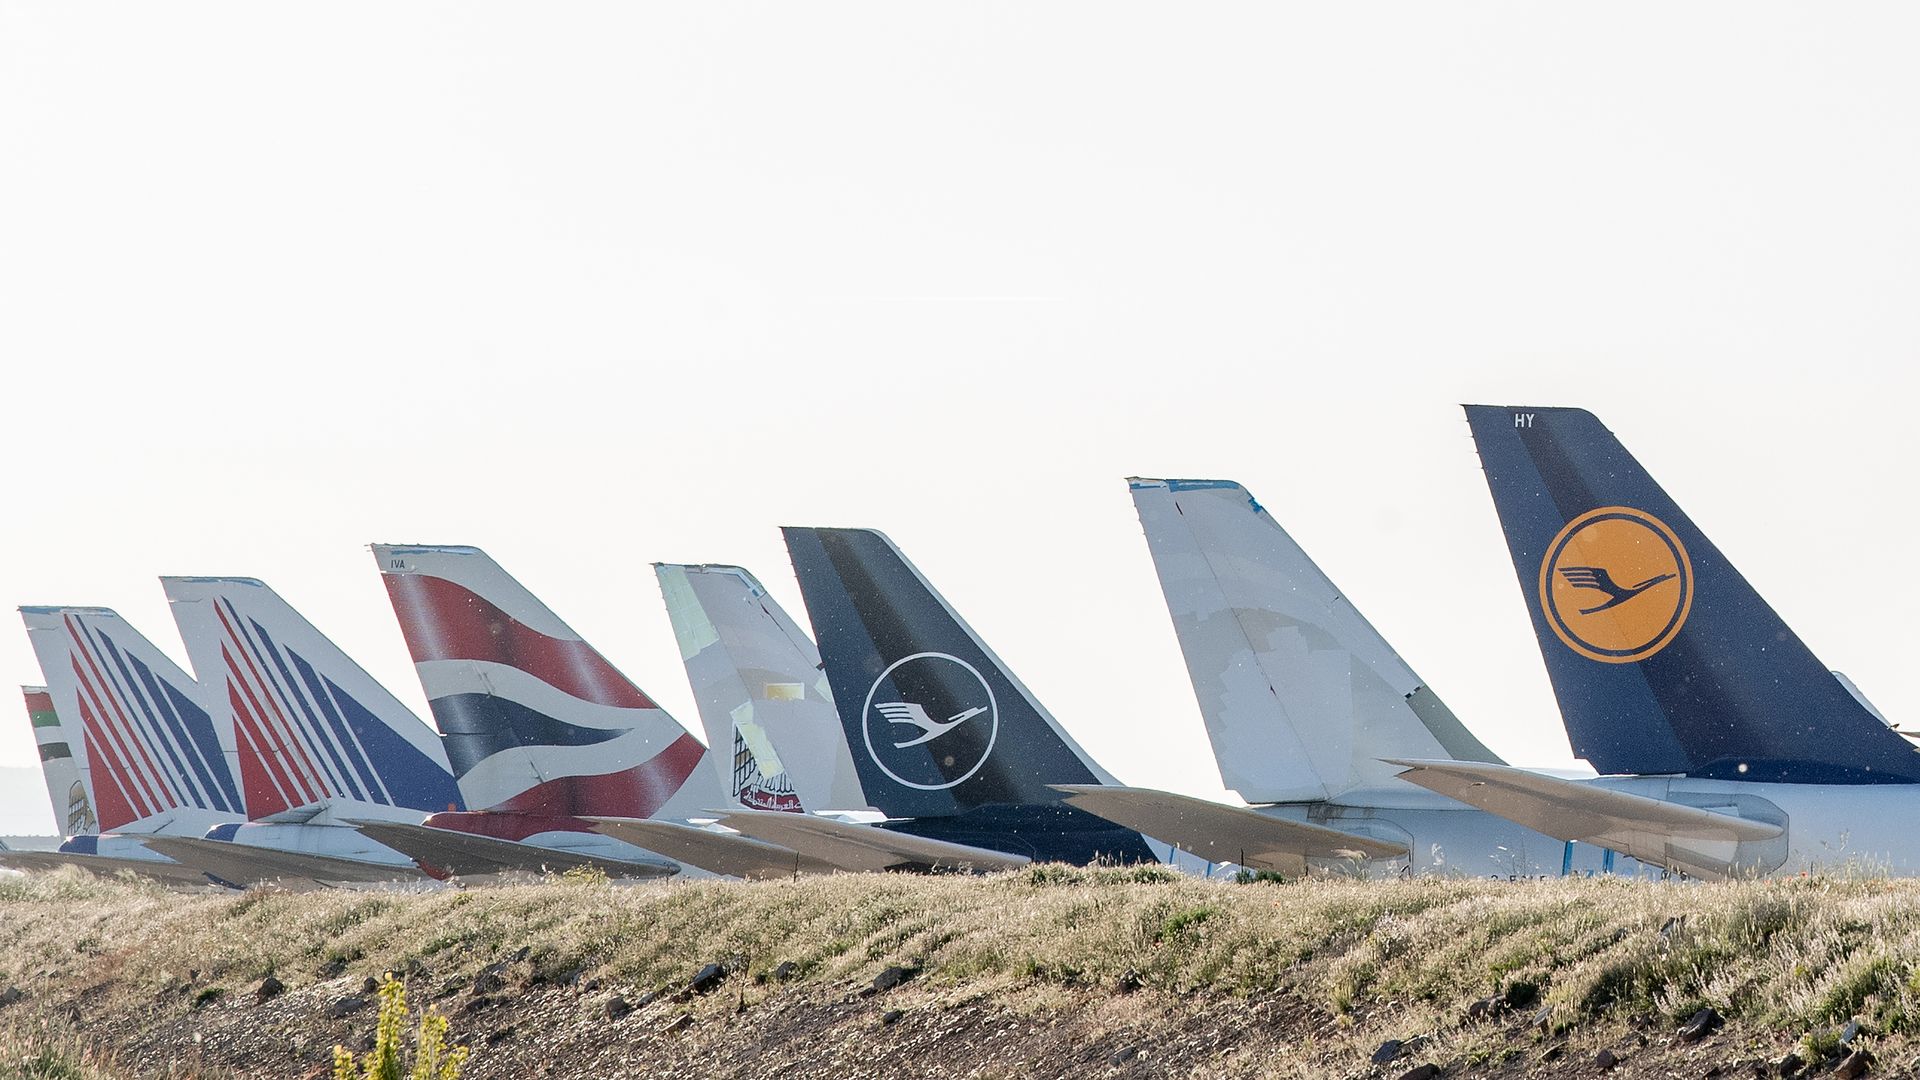 Passenger aircraft operated by Lufthansa, British Airways and Lufthansa stand parked in a storage facility in Spain